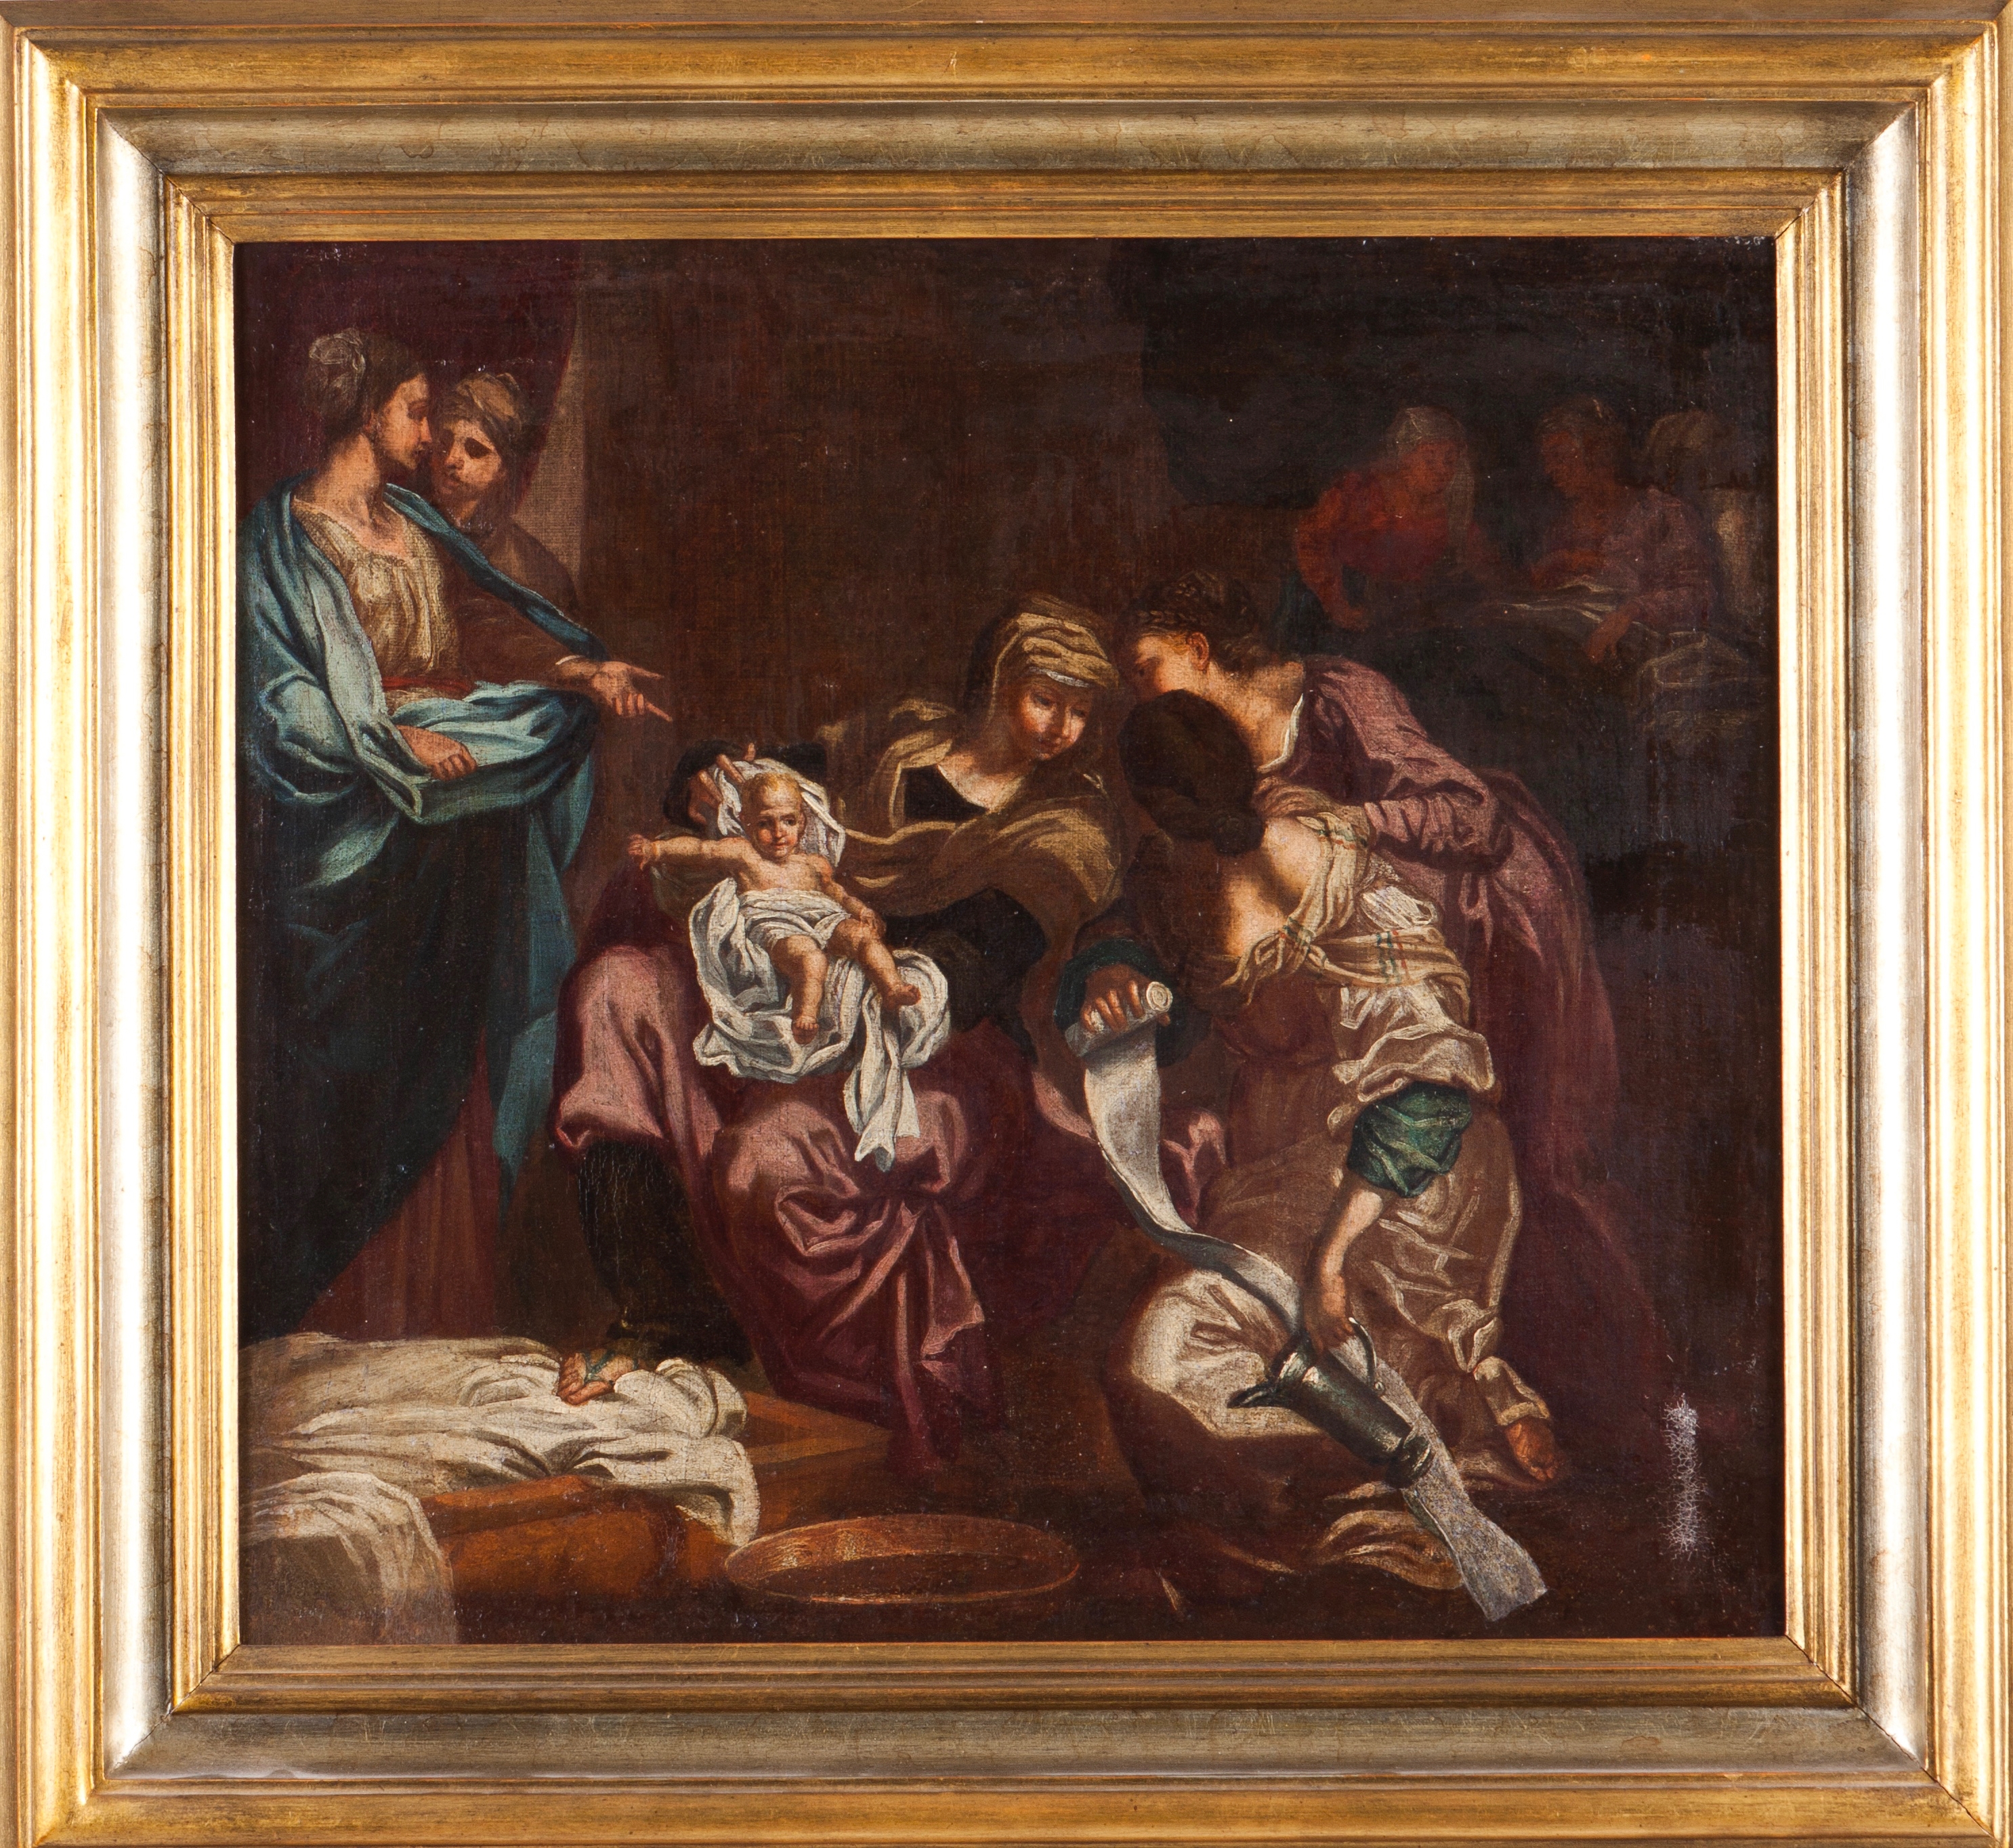 Nativity of Our Lady by Portuguese School, 18th Century, 18th-19th century